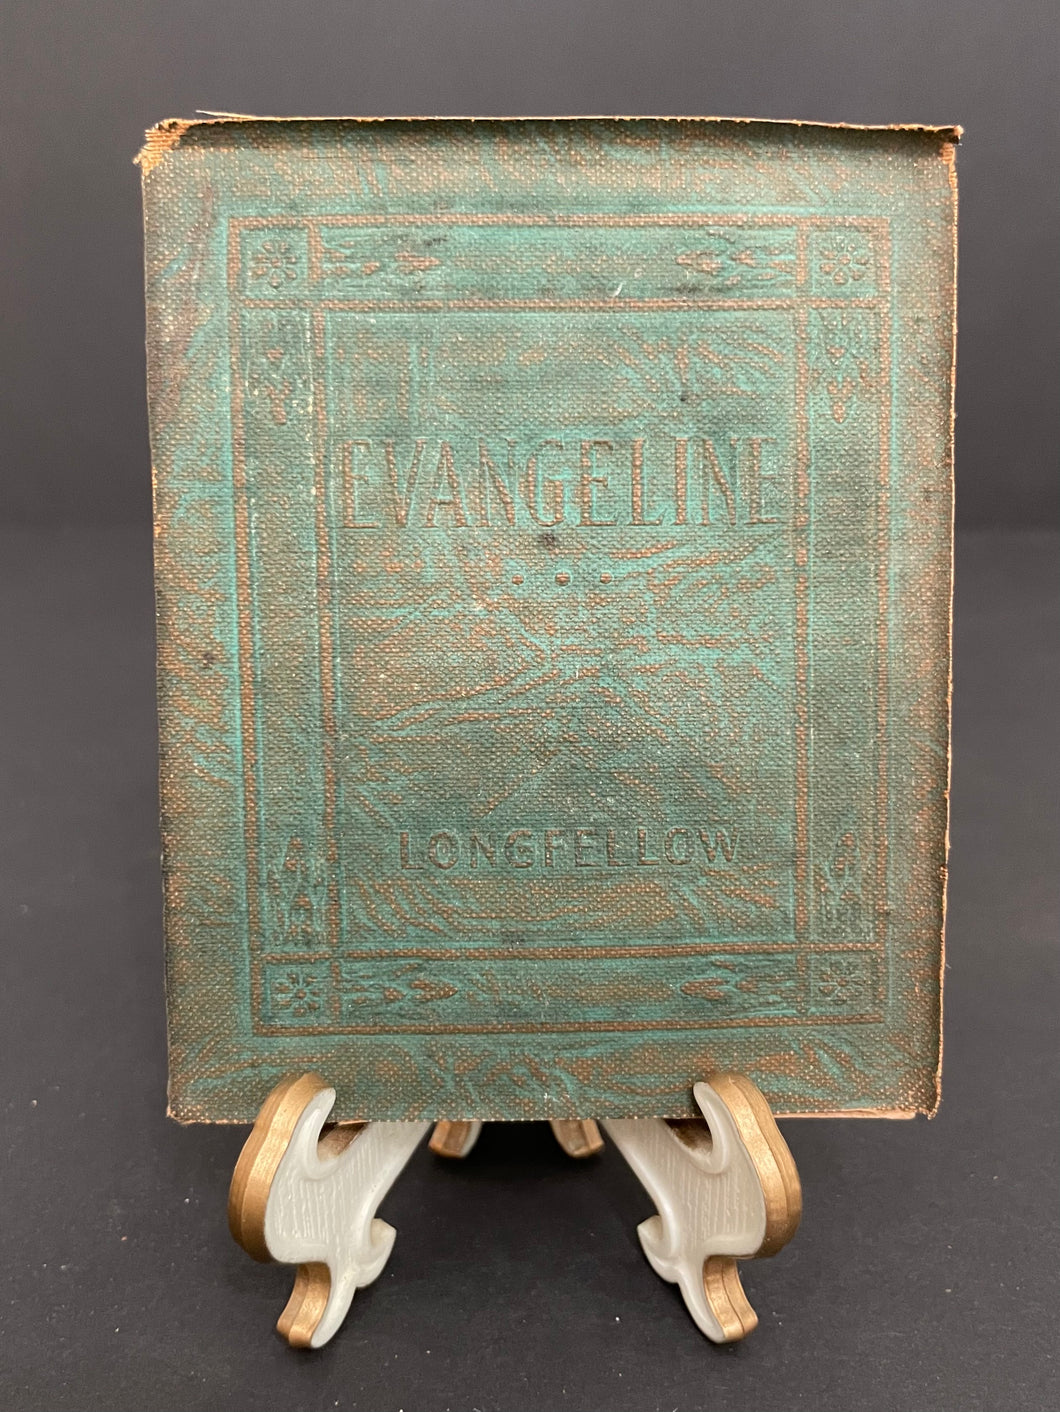 Antique Little Leather Library “Evangeline” by Longfellow Book